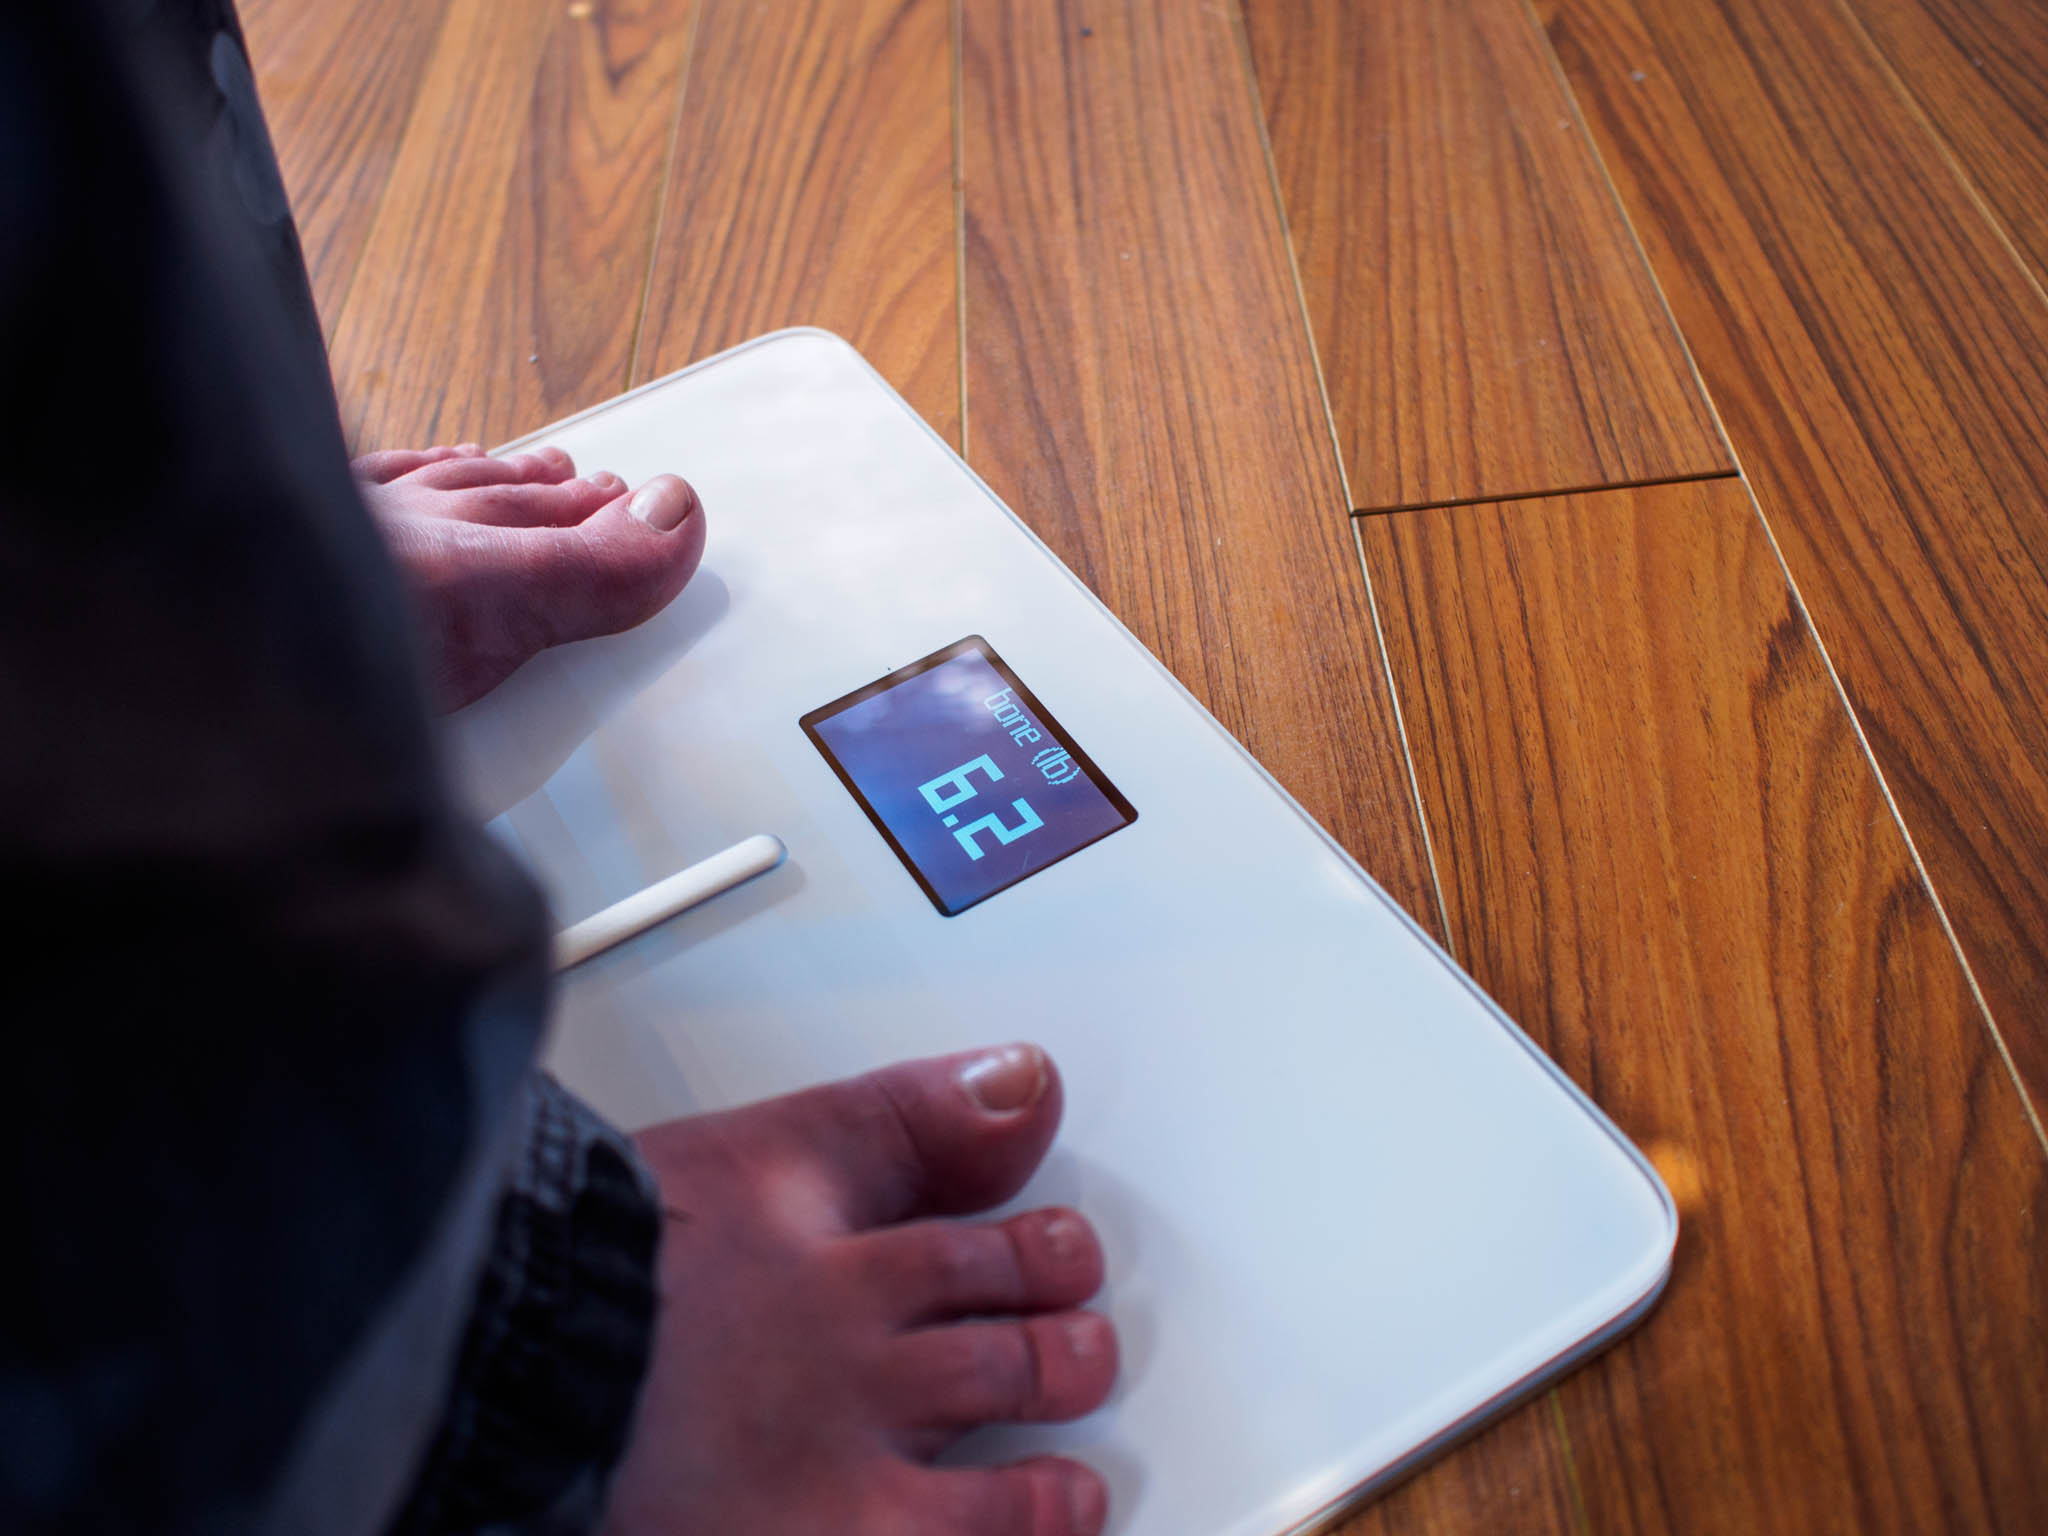 Feet on: Withings Body Cardio Scale adds tons of sensors for better health